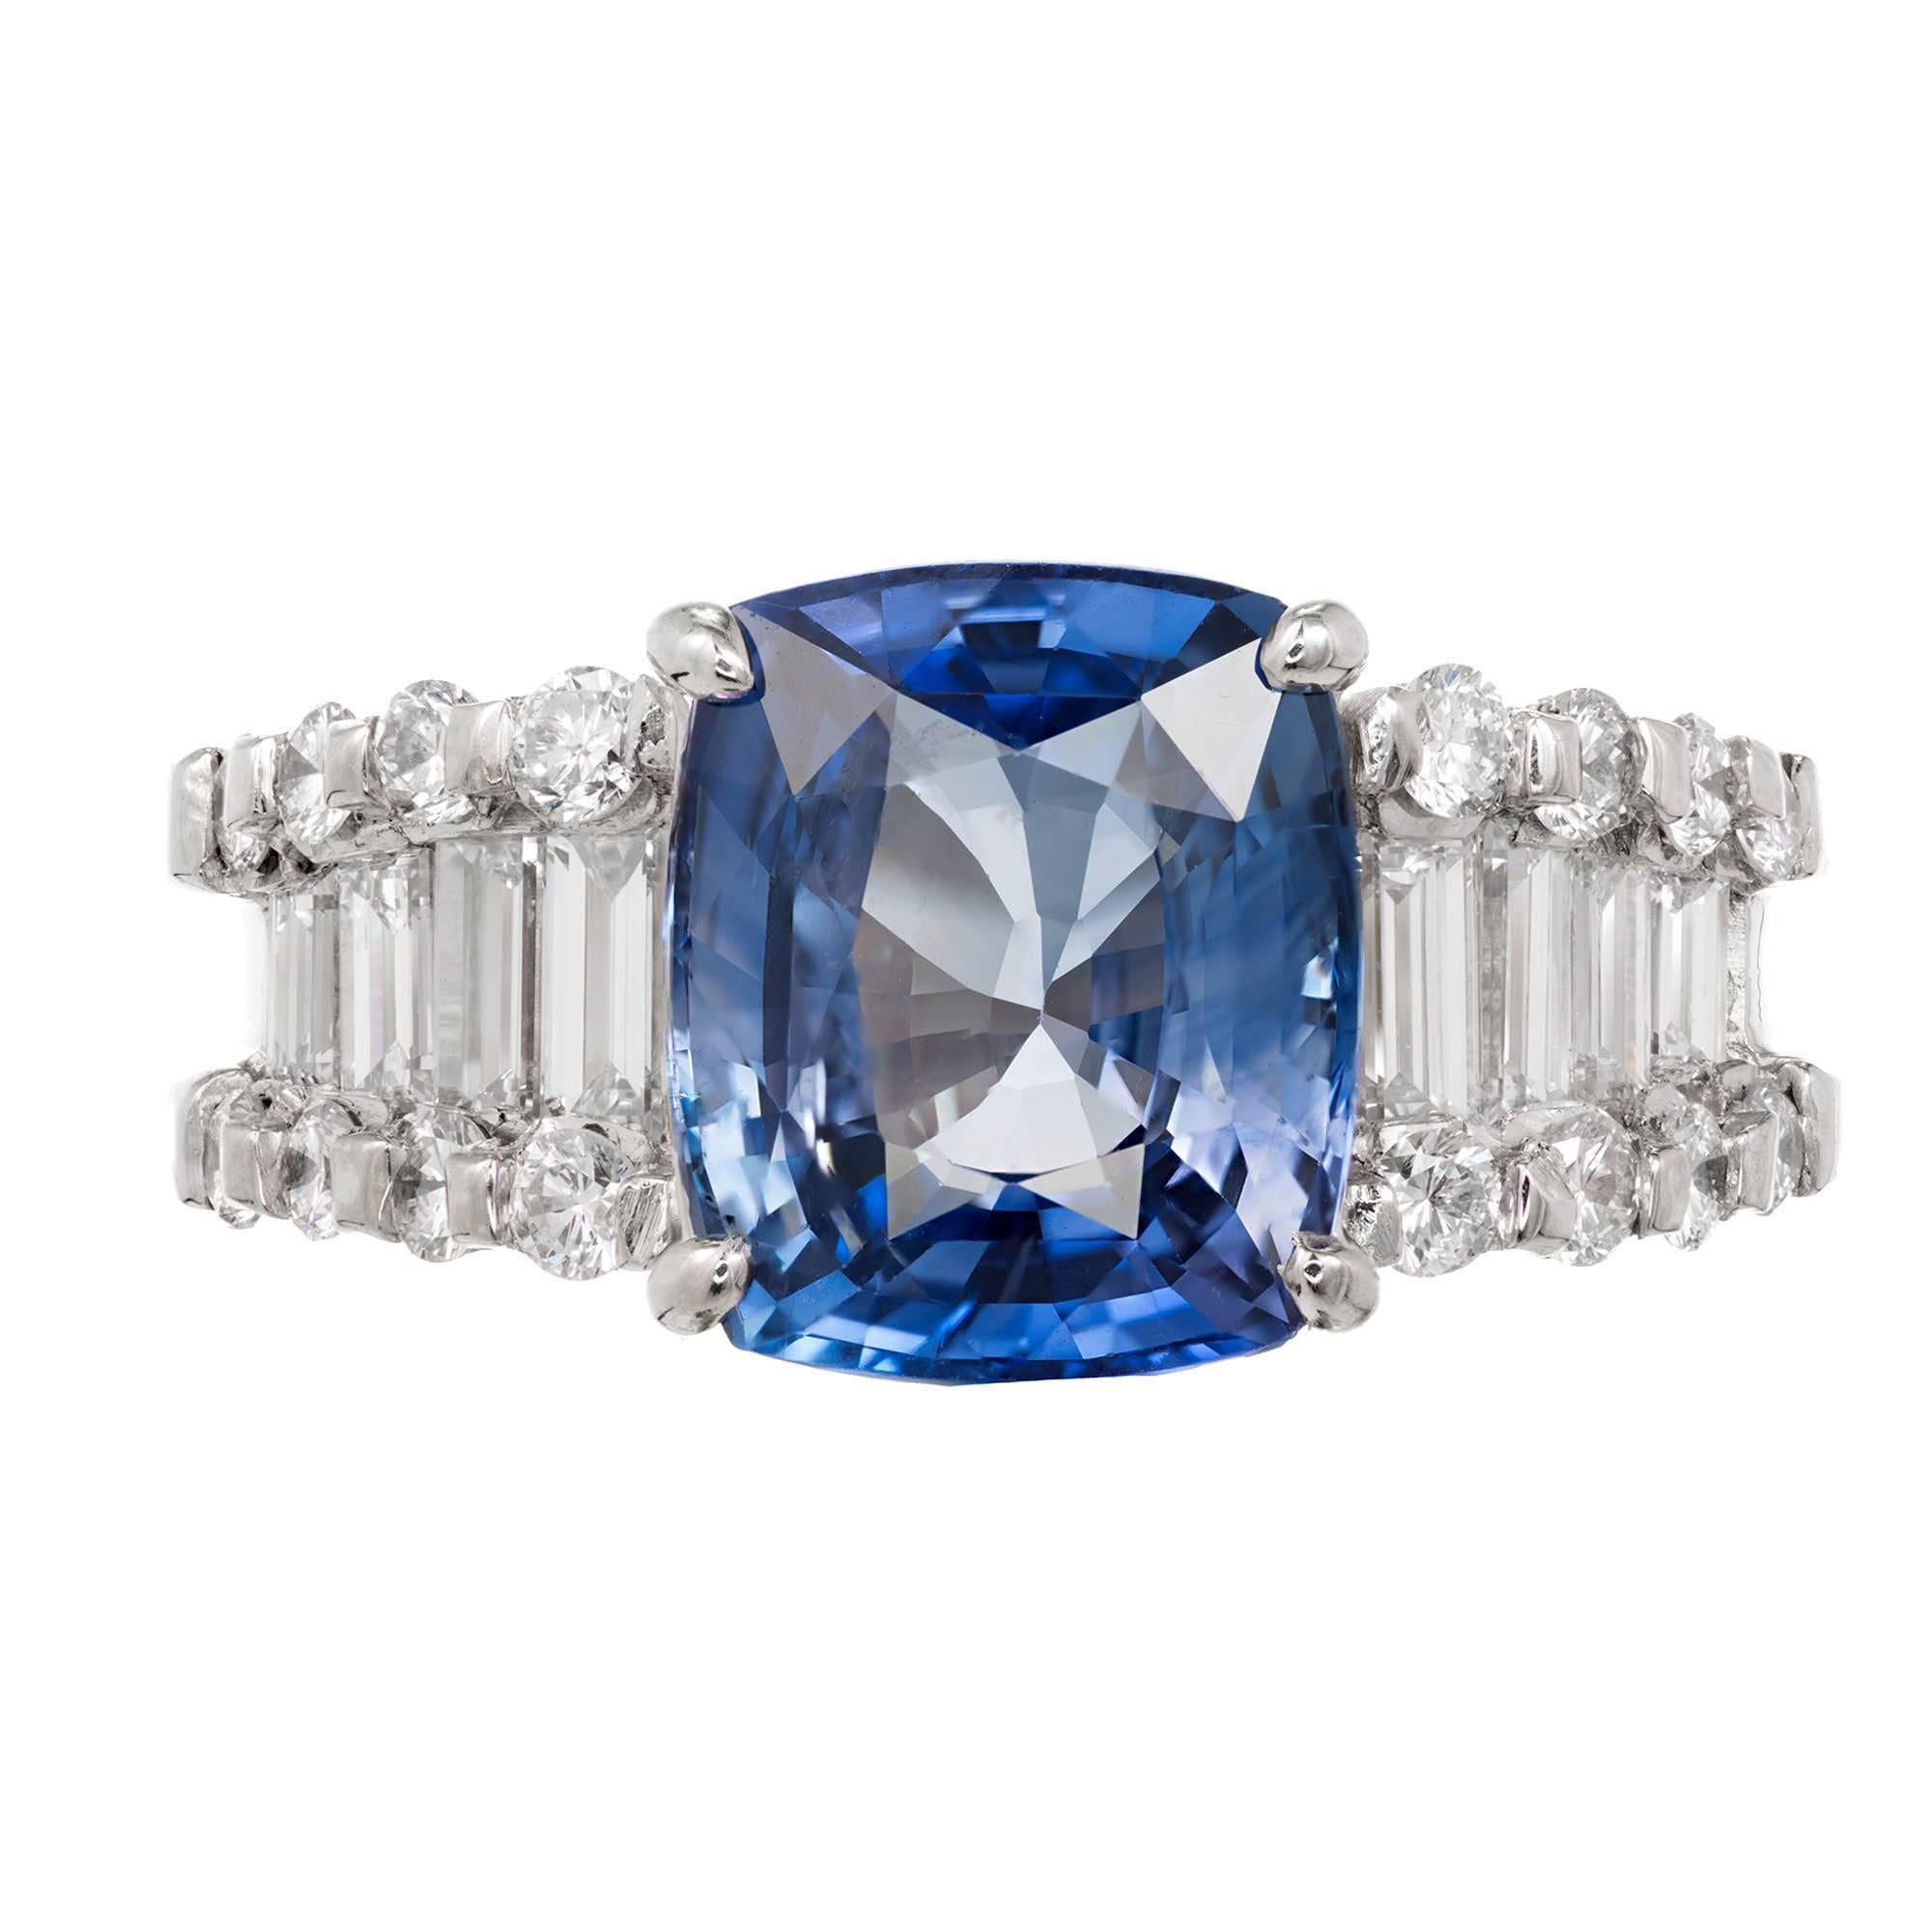 1950-1960 Estate bright blue 6.03 carat cushion cut GIA certified natural sapphire and diamond engagement ring. Platinum setting with a Simple heat, no other enhancement sapphire with emerald and round cut diamond accents. 

1 cushion cut blue